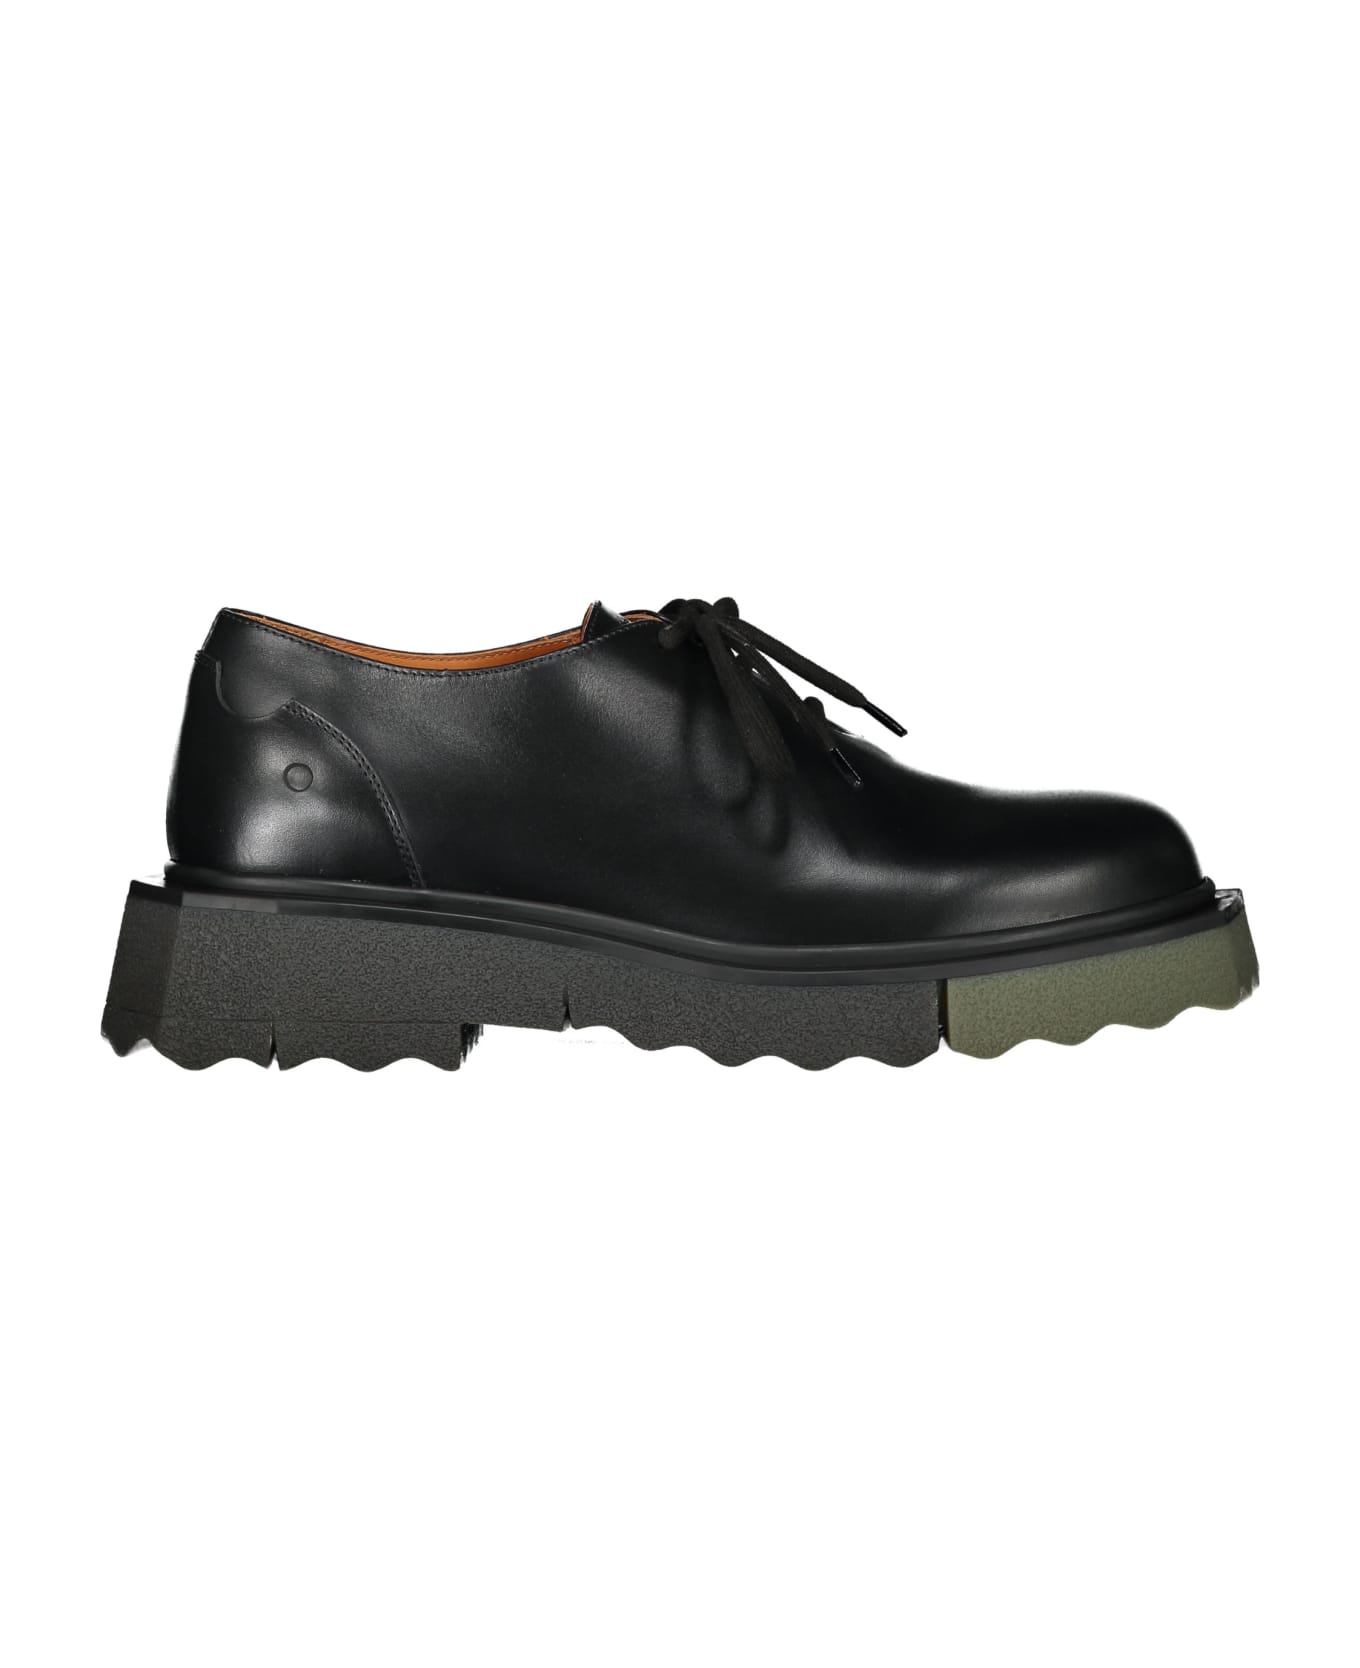 Off-White Leather Lace-up Shoes - black